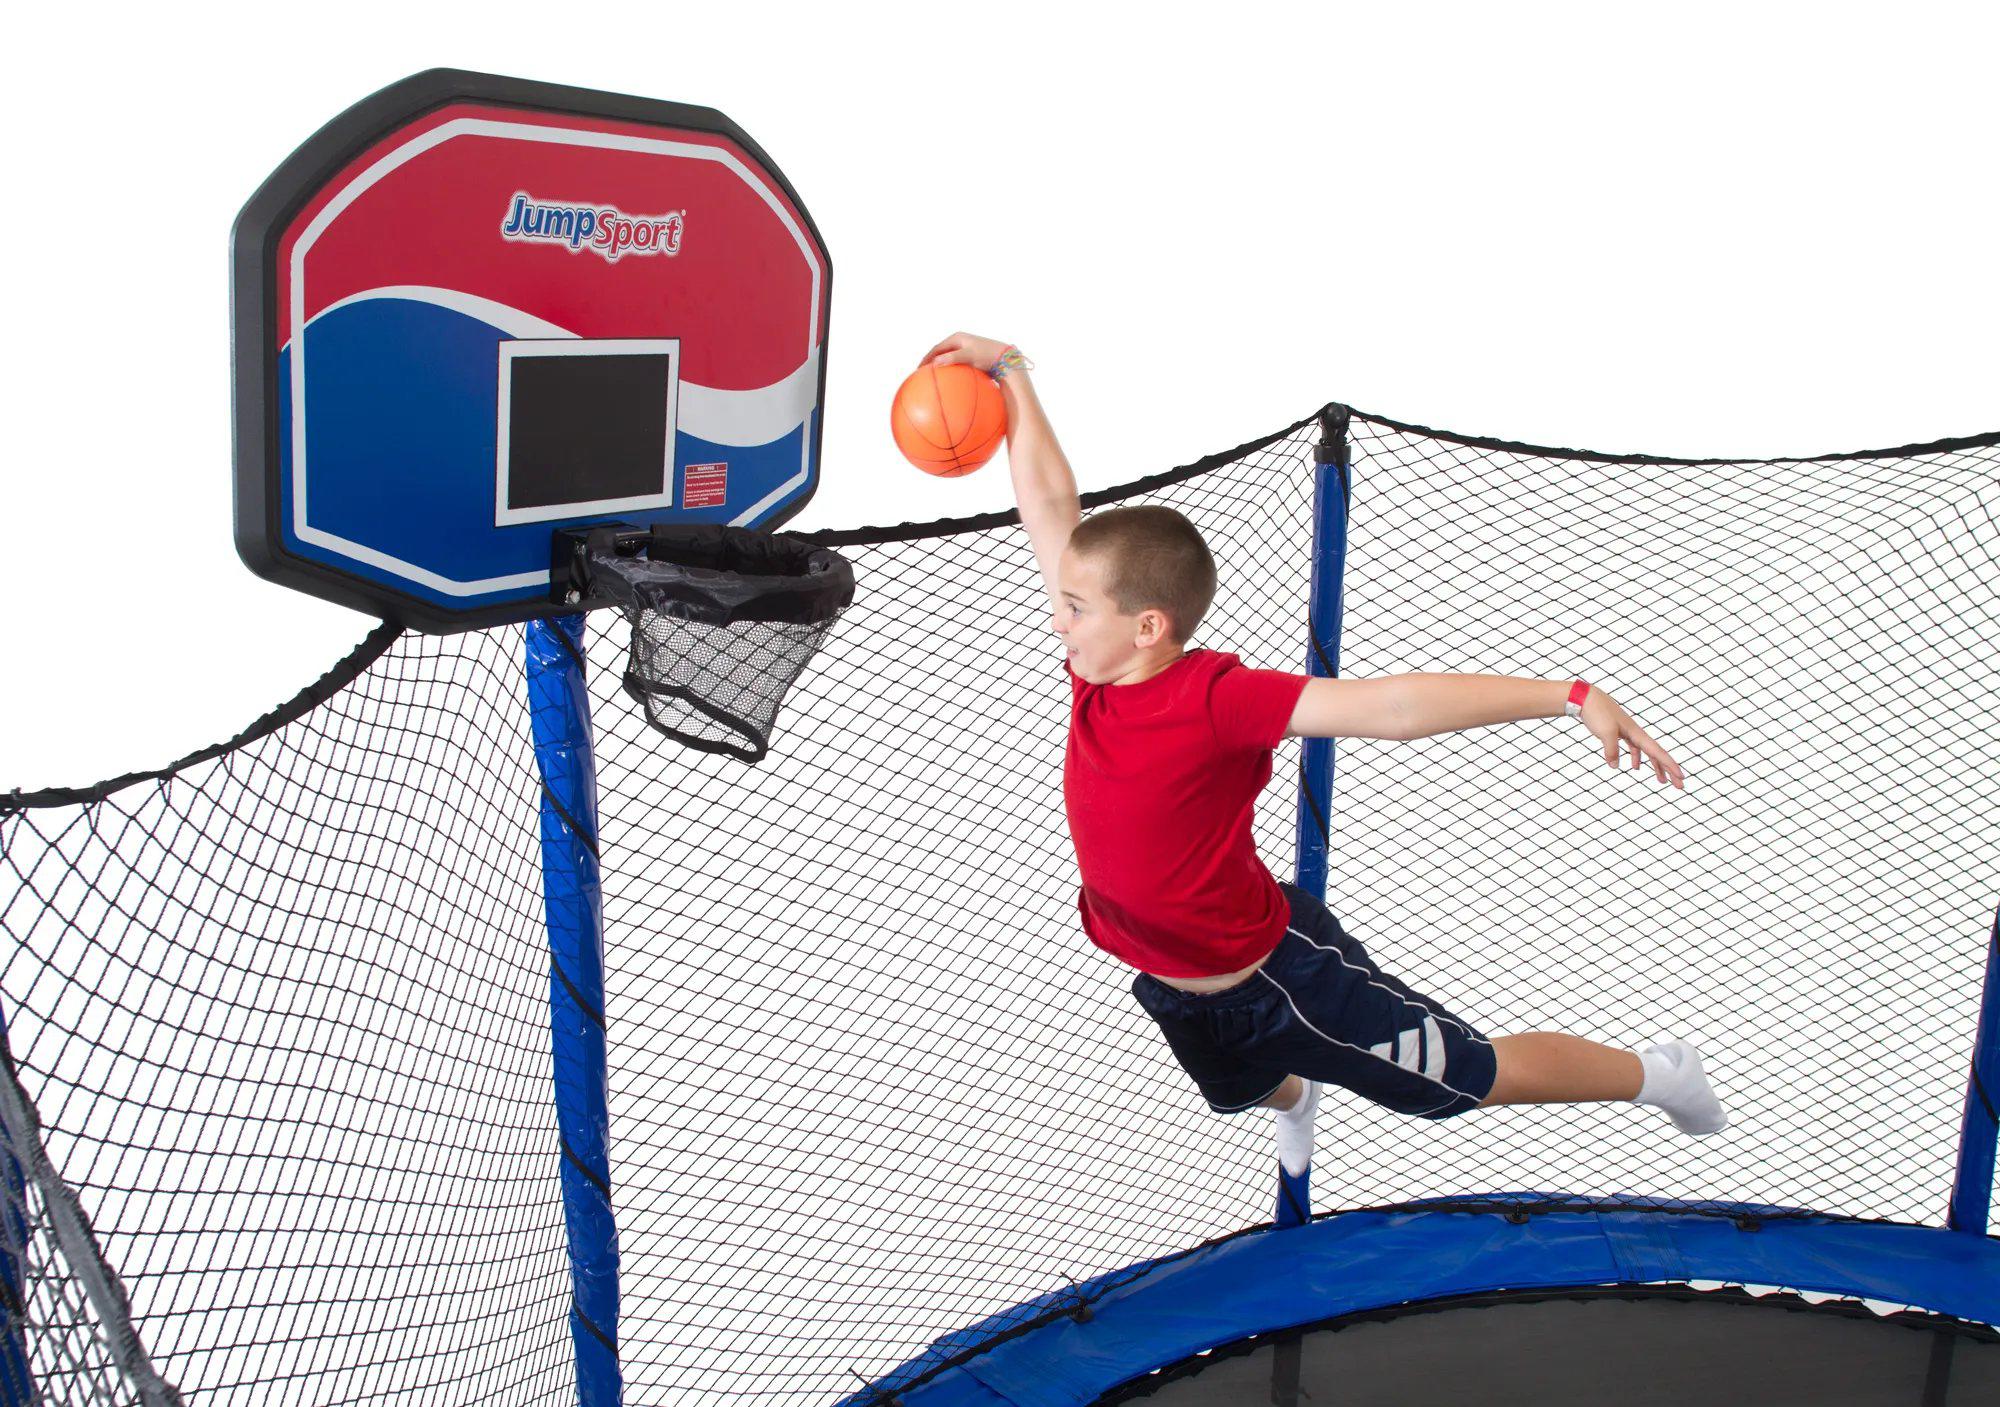 Slam dunk like a PRO with our flexible ProFlex rim!
👉Designed to fit securely on your JumpSport Trampoline Safety Net Enclosure!
👉Includes Backboard, cushioned hoop with Heavy-duty ProFlex hardware, and inflatable ball!